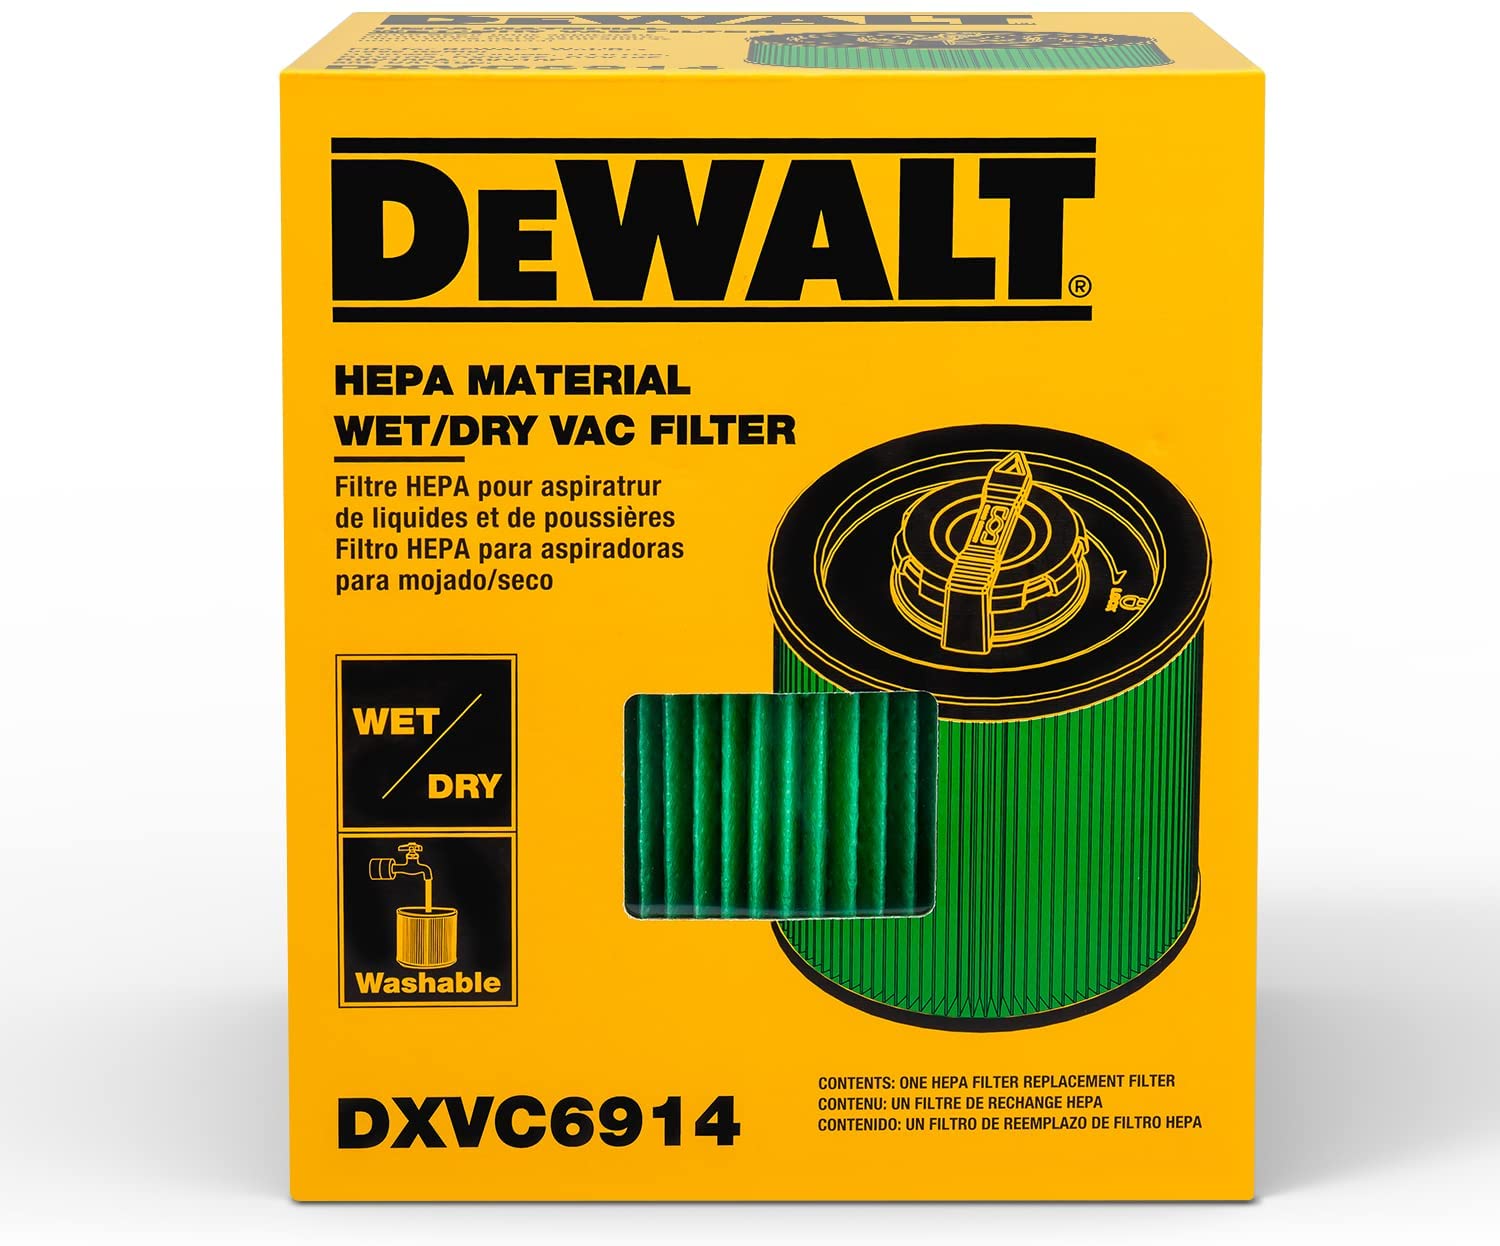 Hometimes DXVC6914 HEPA Cartridge Filter, Fit for 6-16 Gallon Wet/Dry  Vacuum Cleaners, Compatible with DeWalt DXV06P DXV09P DXV09PA DXV10P  DXV10PL DXV10S DXV10SA DXV10SB DXV12P DXV14P DXV16P DXV16PA